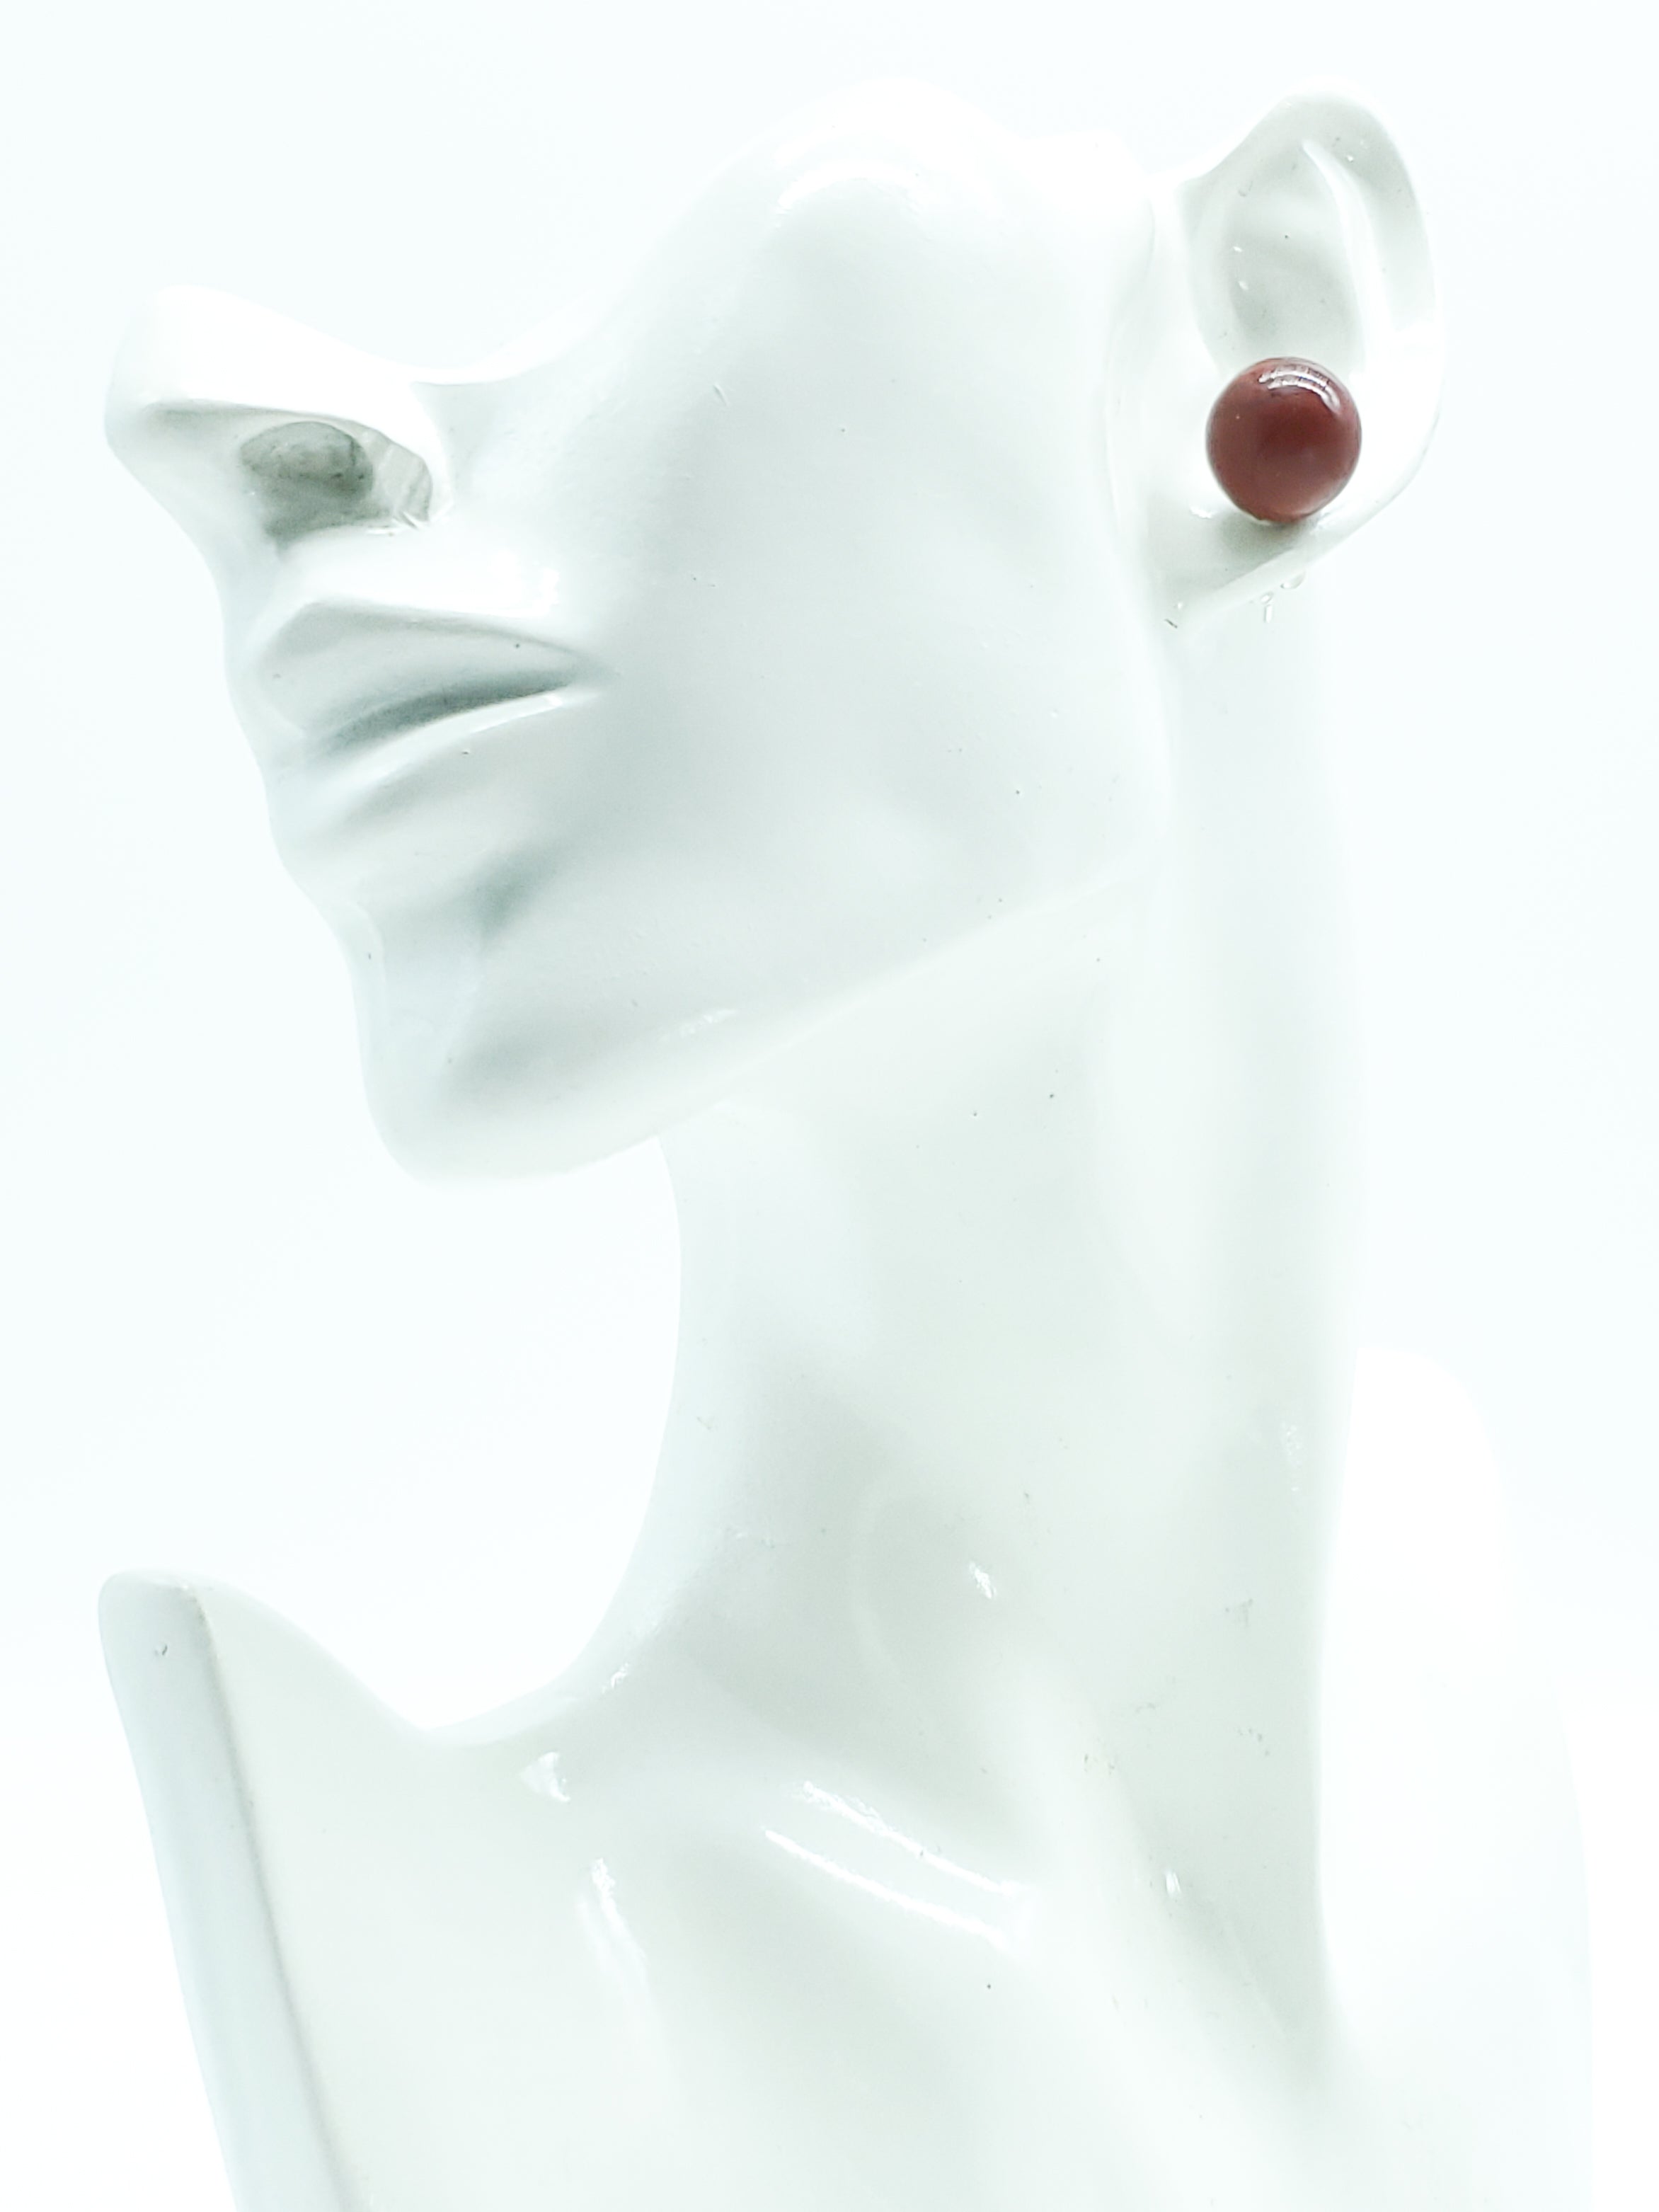 Red Jasper Earrings on Sterling Silver Studs - The Caffeinated Raven